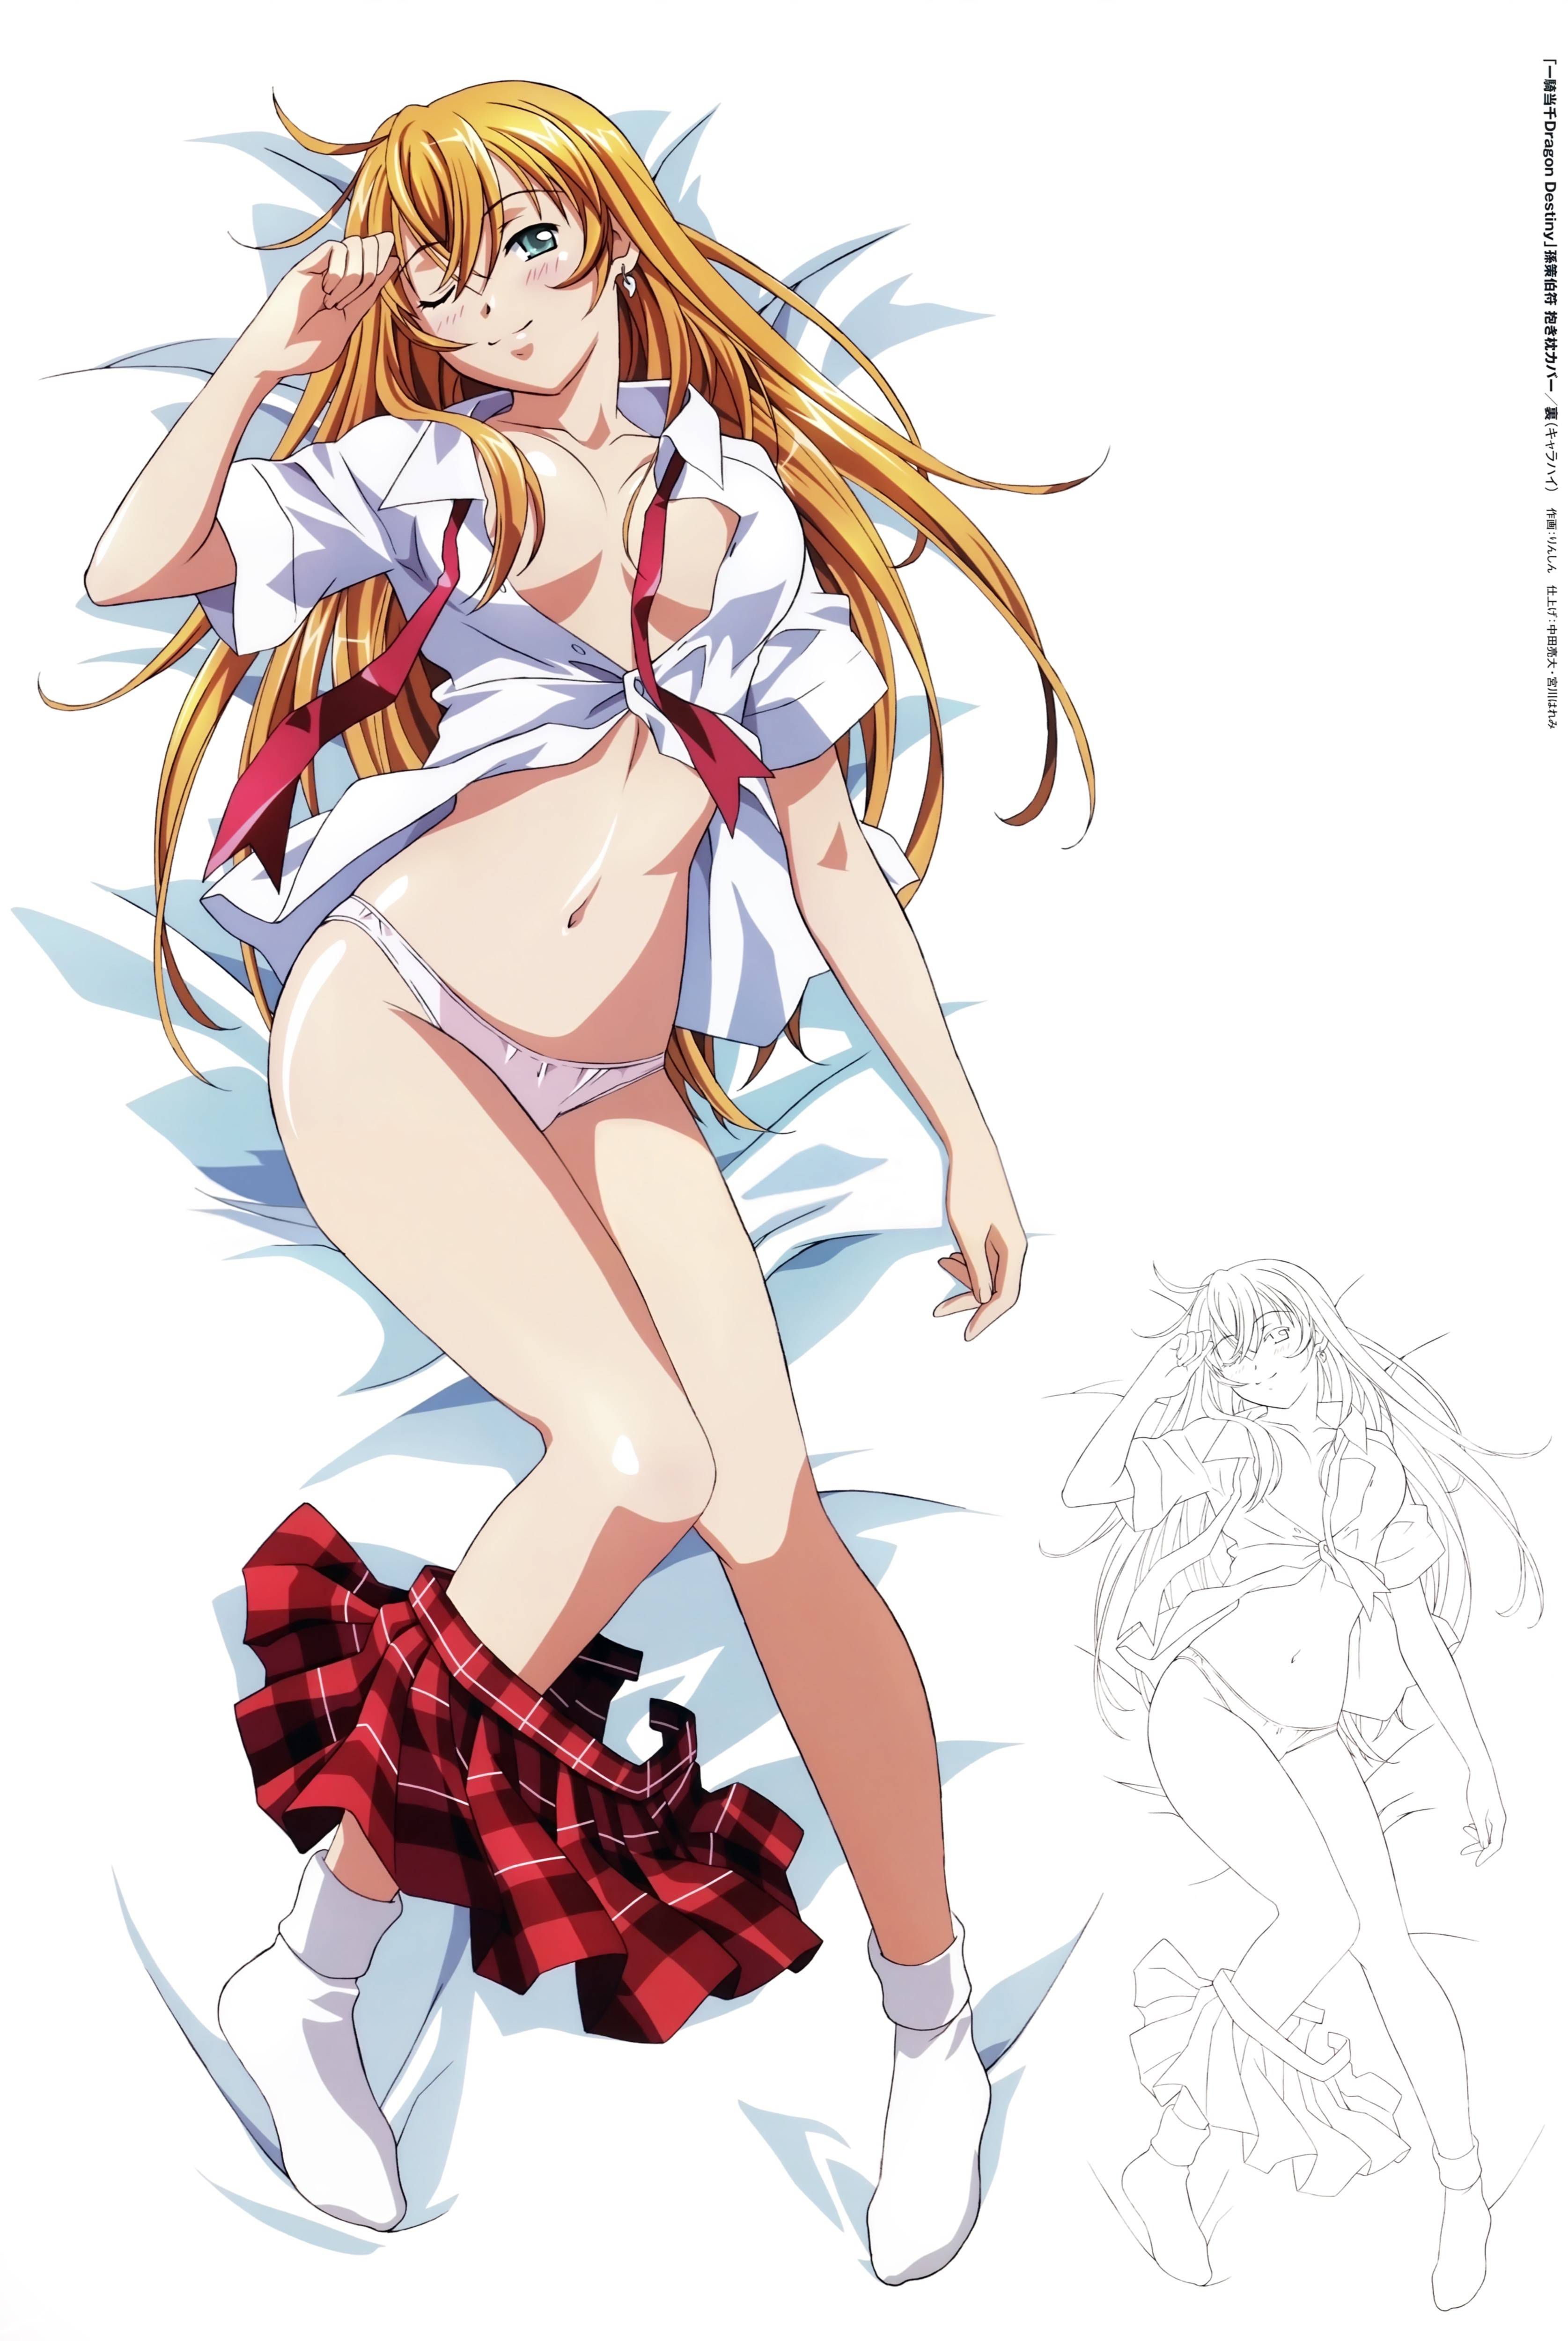 【Image】Queen's Blade and The Erotic Anime ... 107